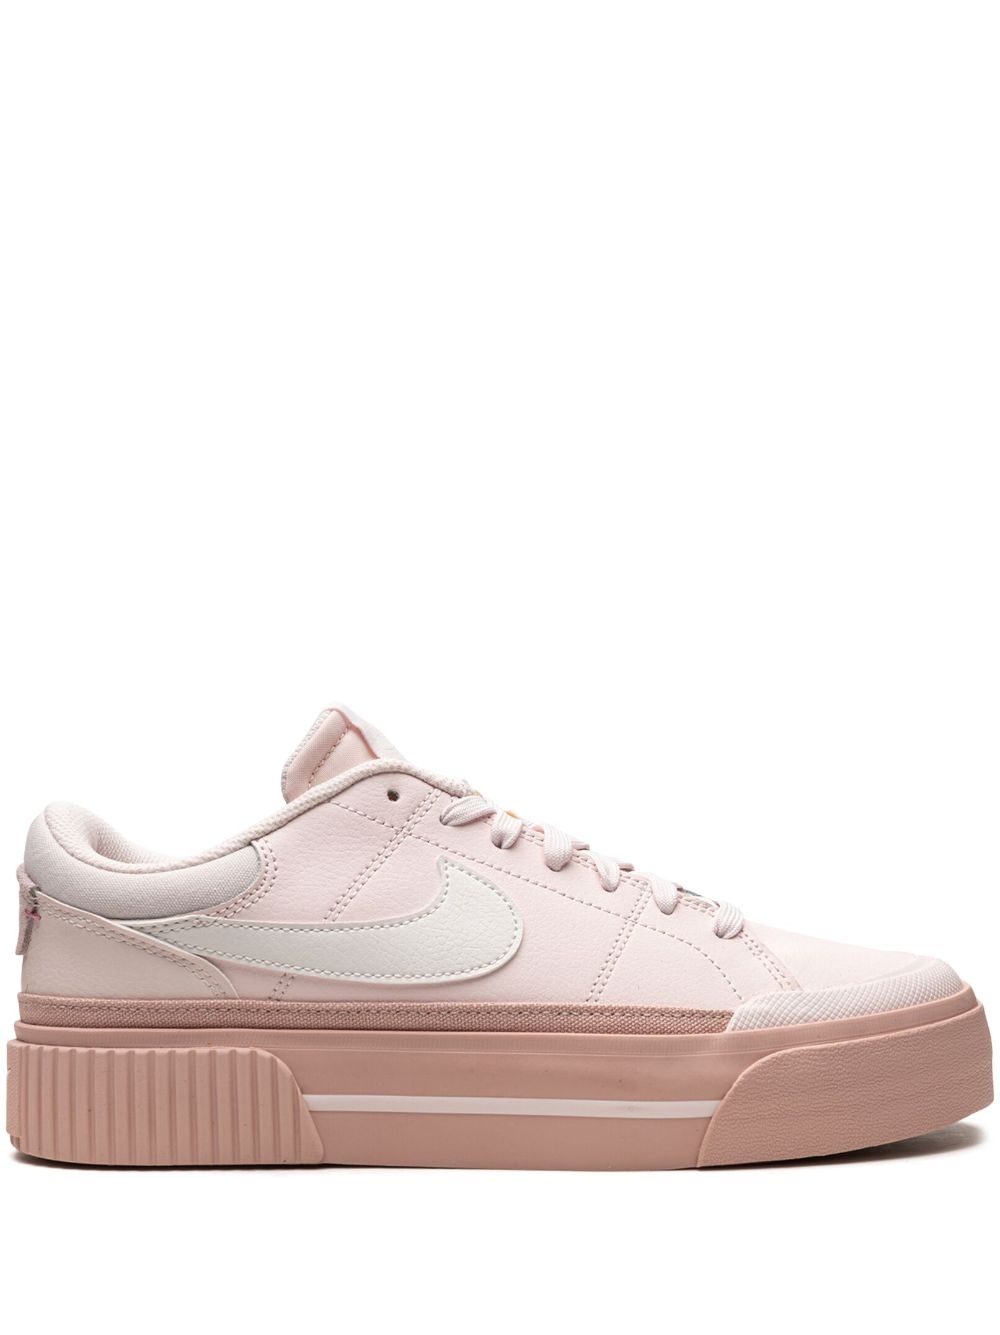 Court Legacy Lift "Light Soft Pink" sneakers - 1